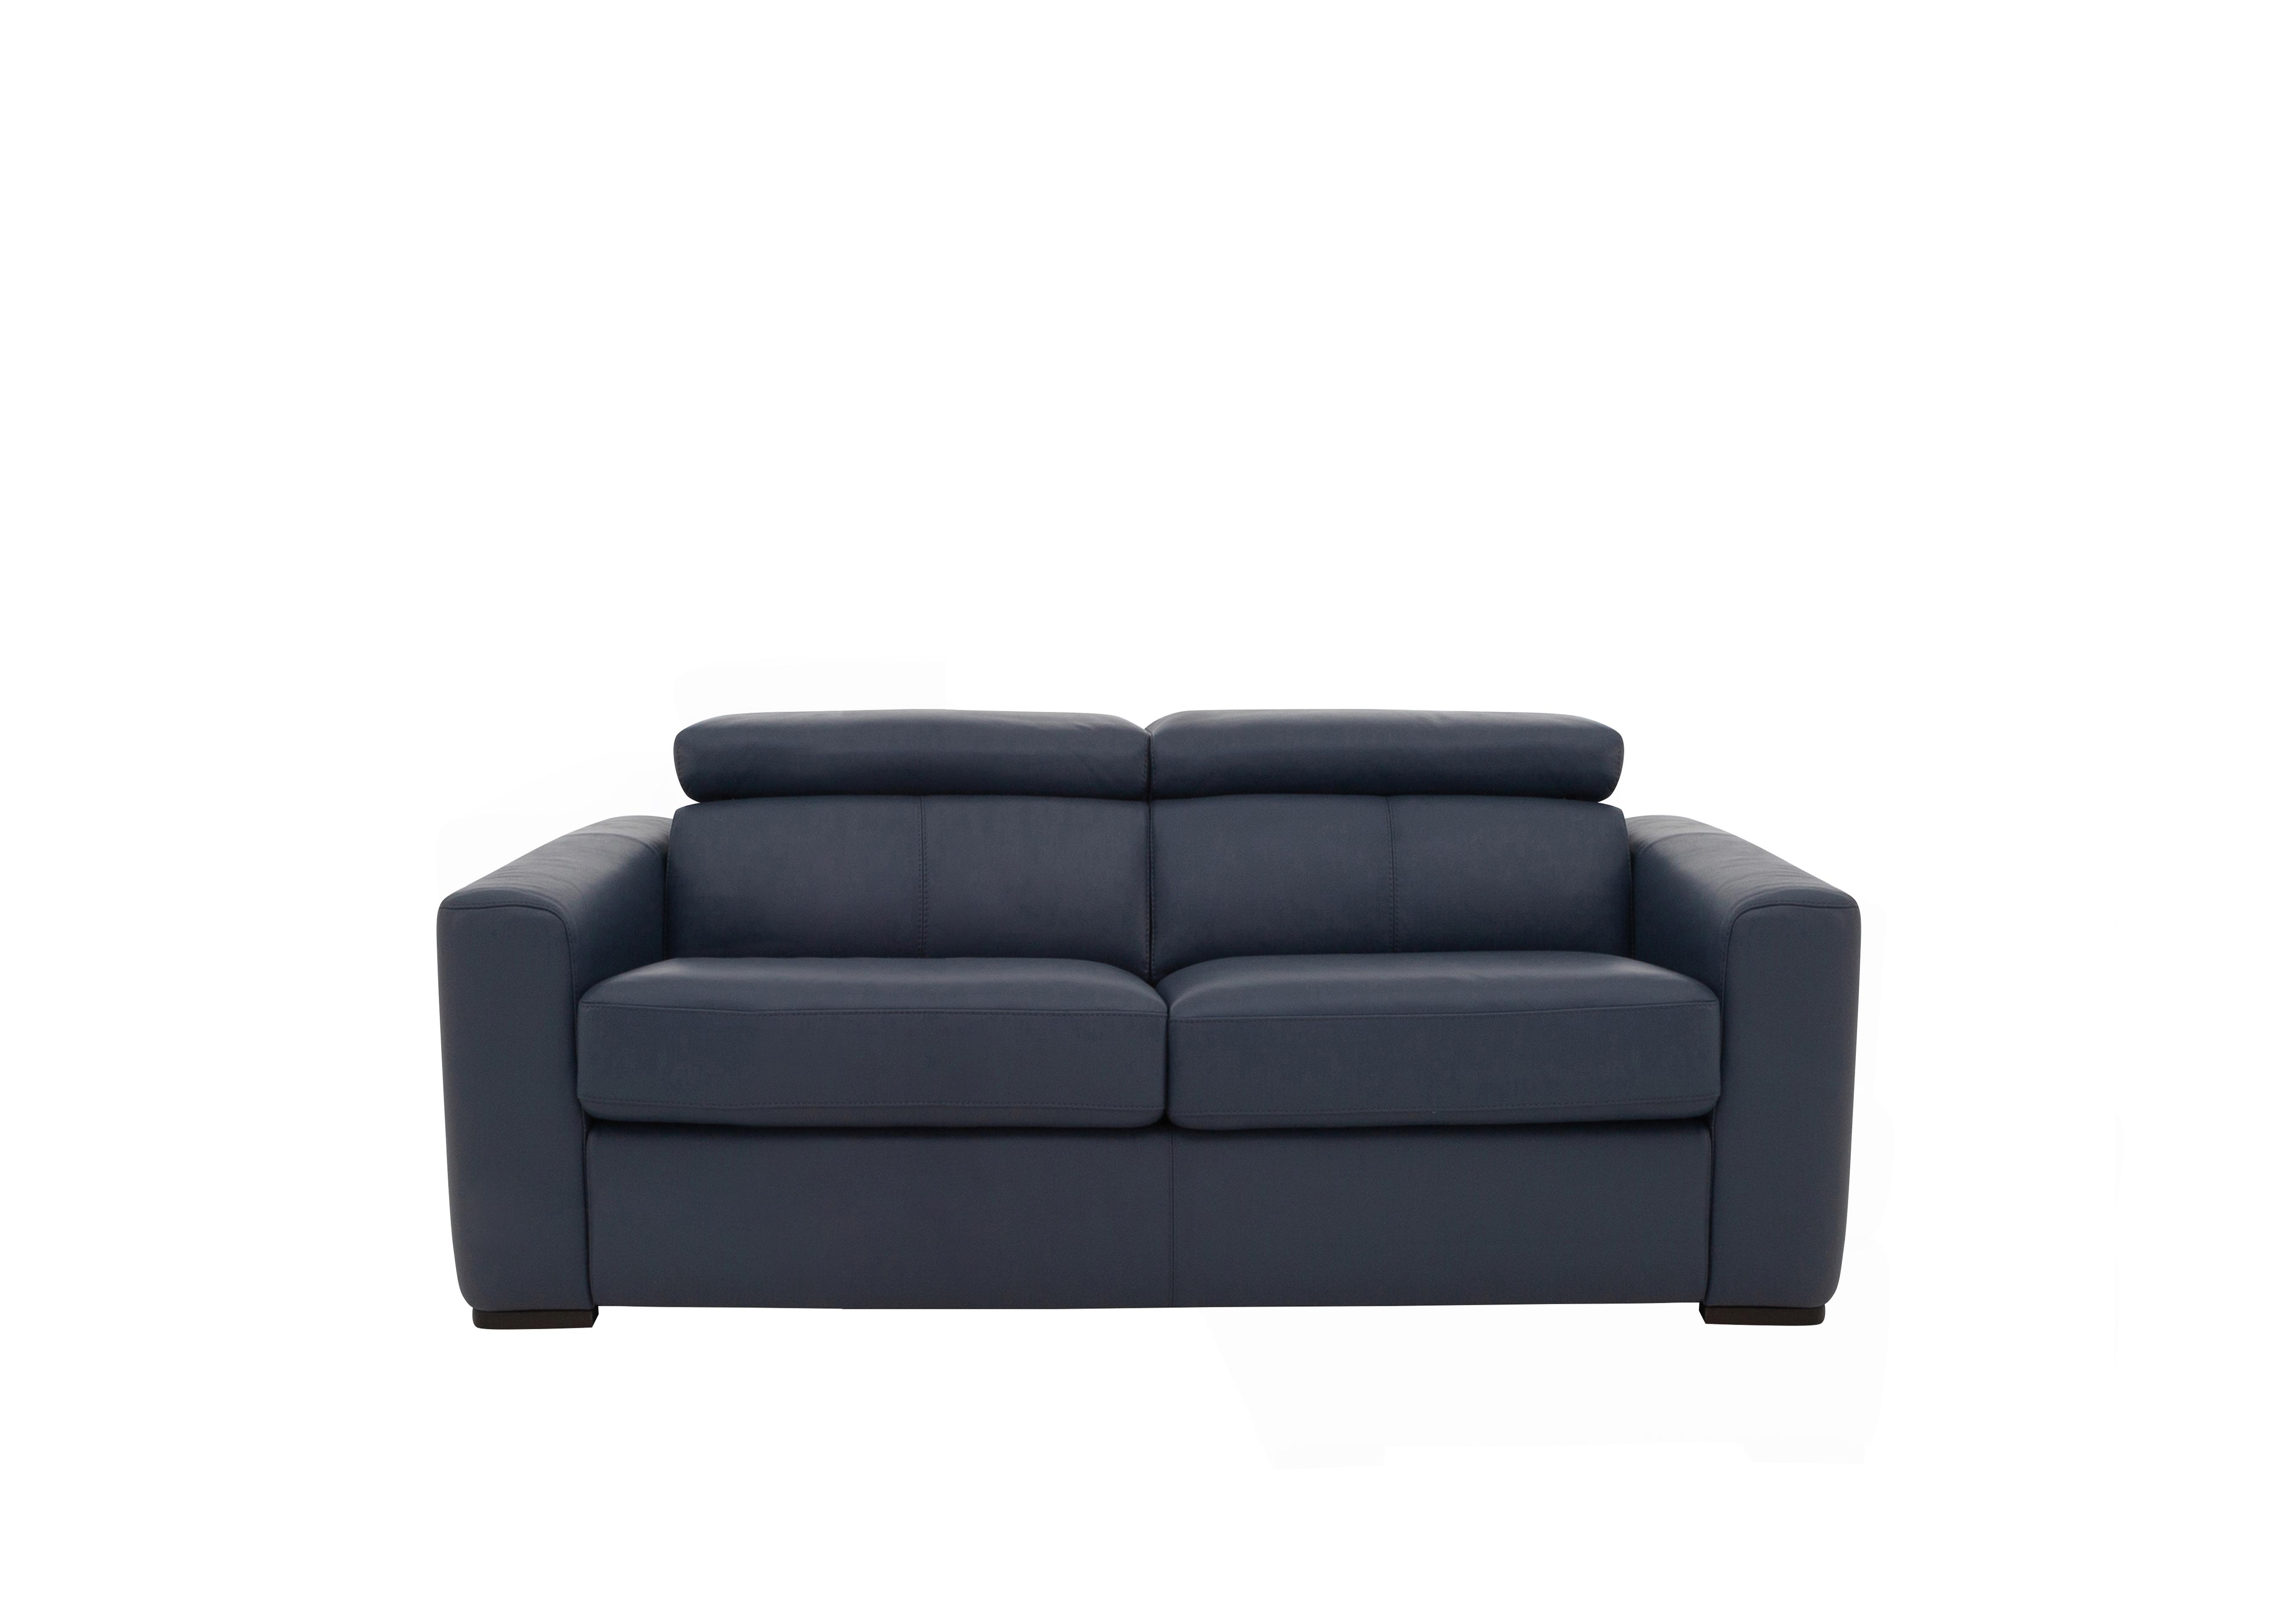 Infinity 2 Seater Leather Sofa in Nc-313e Ocean Blue on Furniture Village